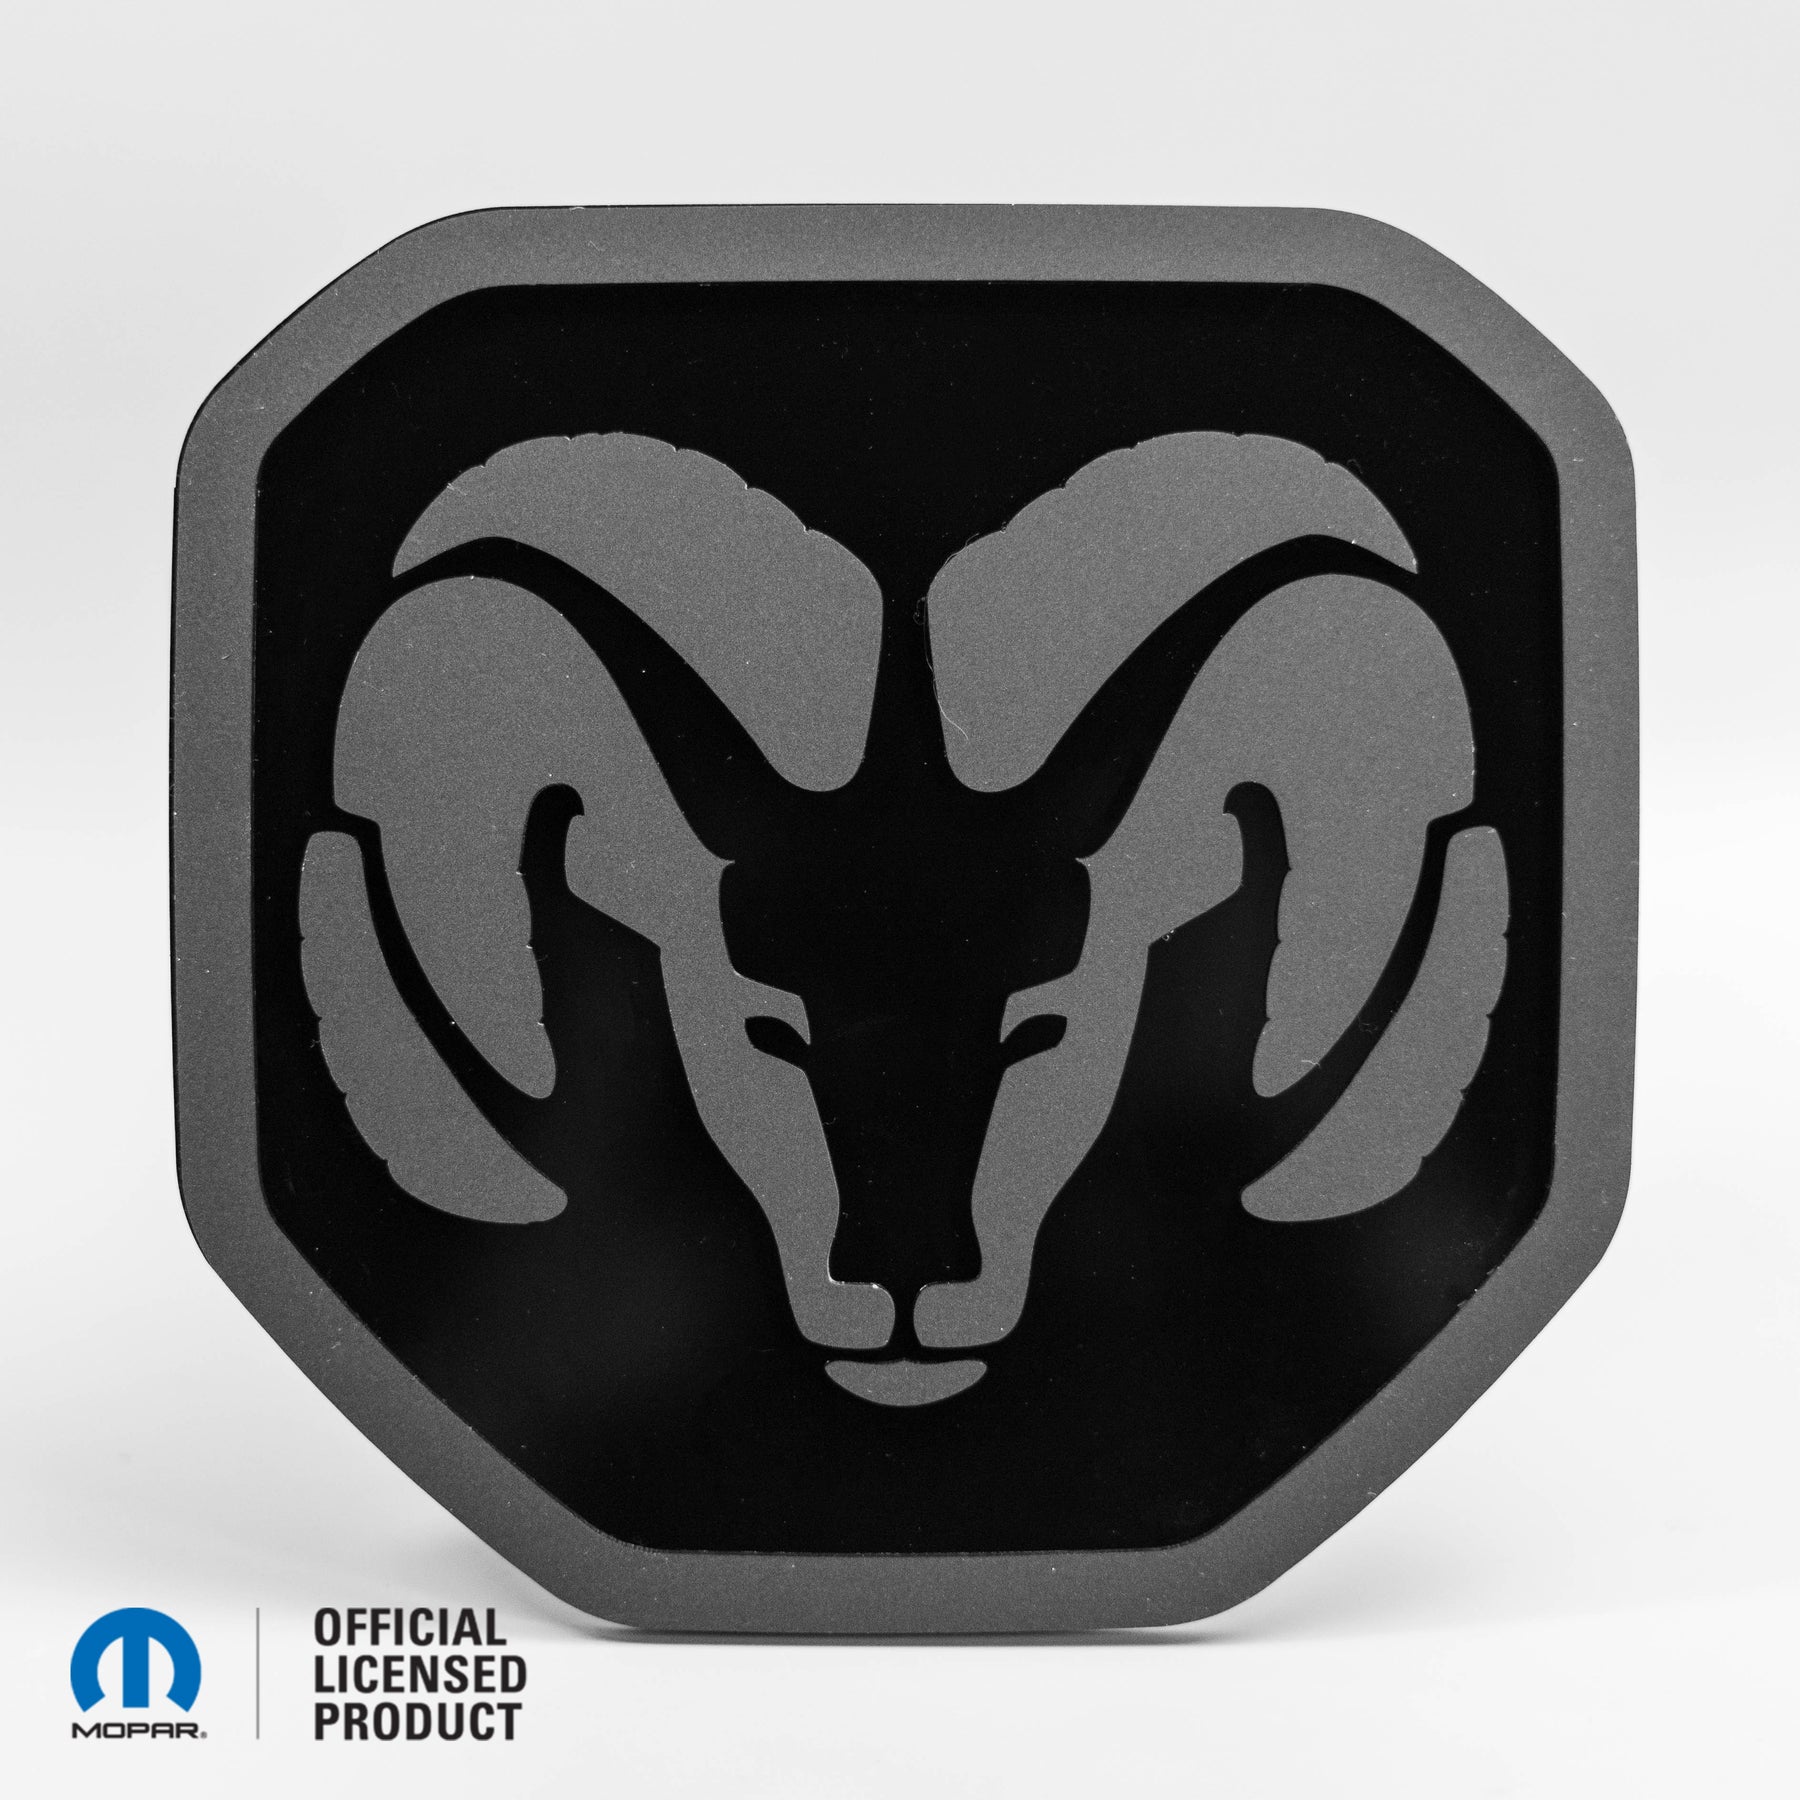 RAM® Head Logo Style 2 Tailgate Badge - Fits 2019-2023 RAM® Tailgate - 1500, 2500, 3500 - Matte on Gloss- Officially Licensed Product